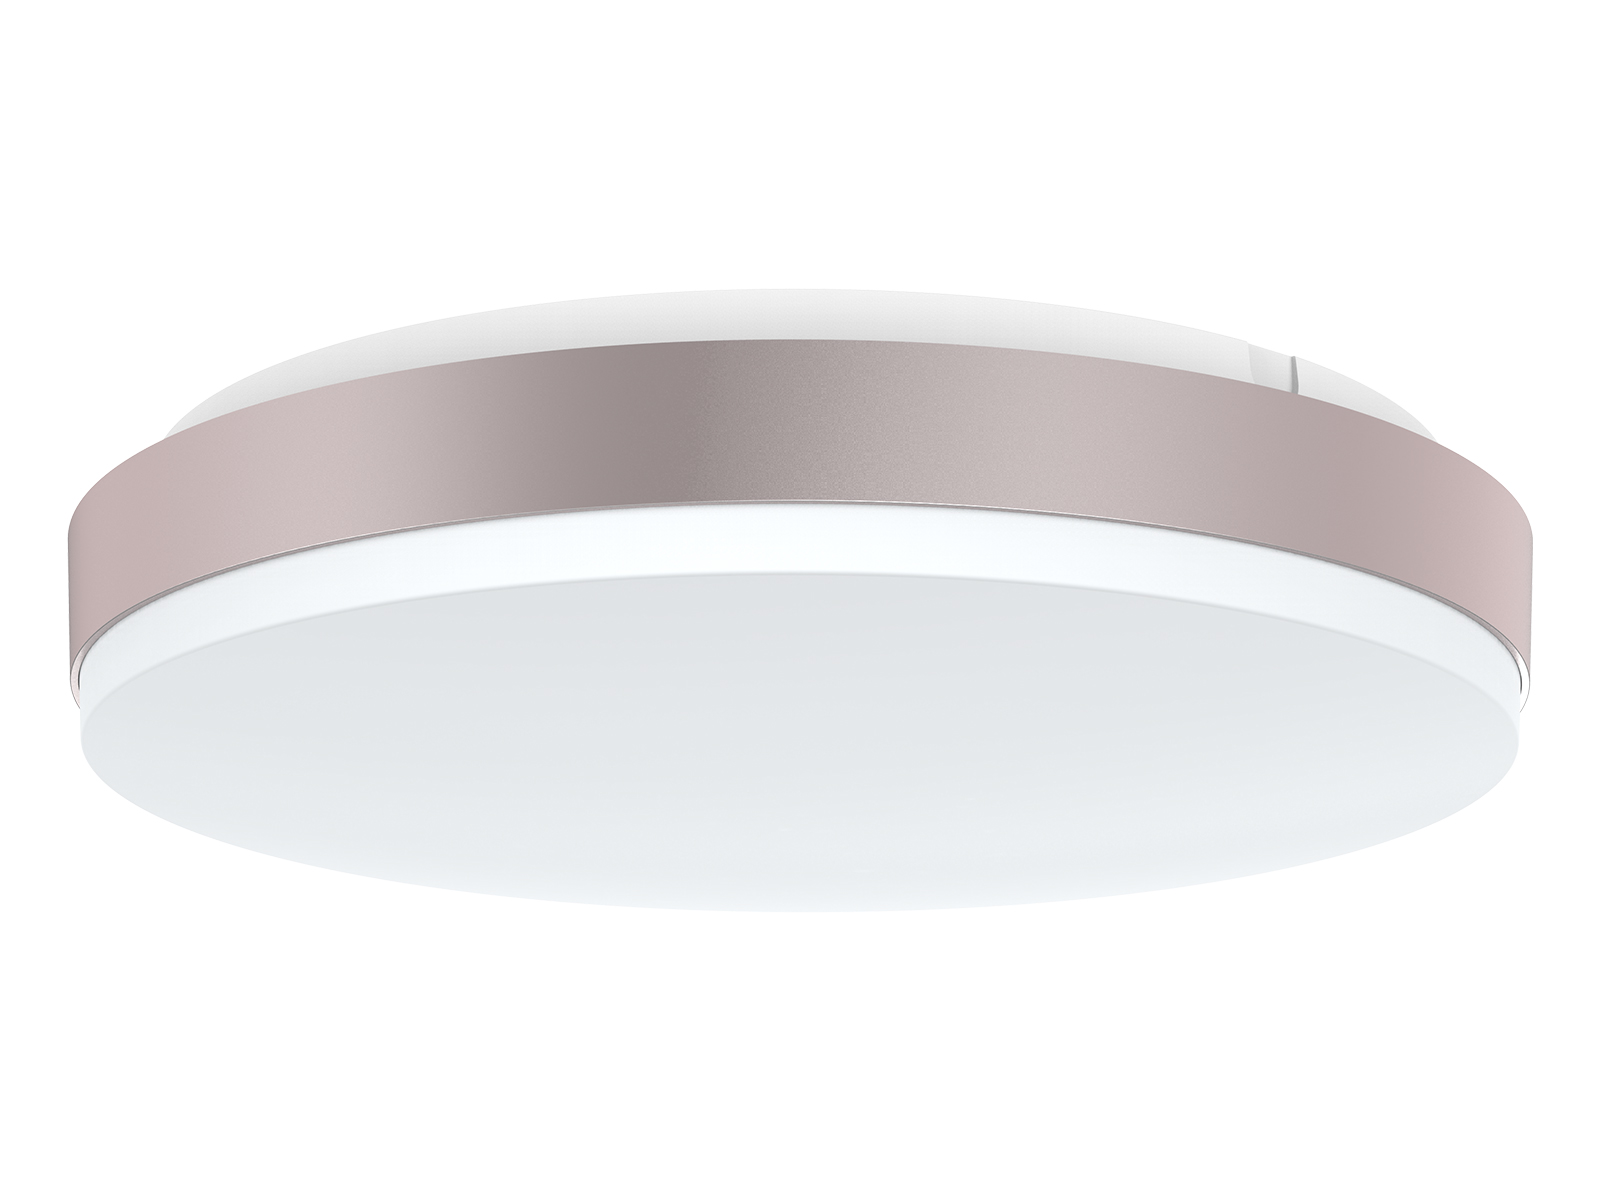 Ceiling Light Fixture Without